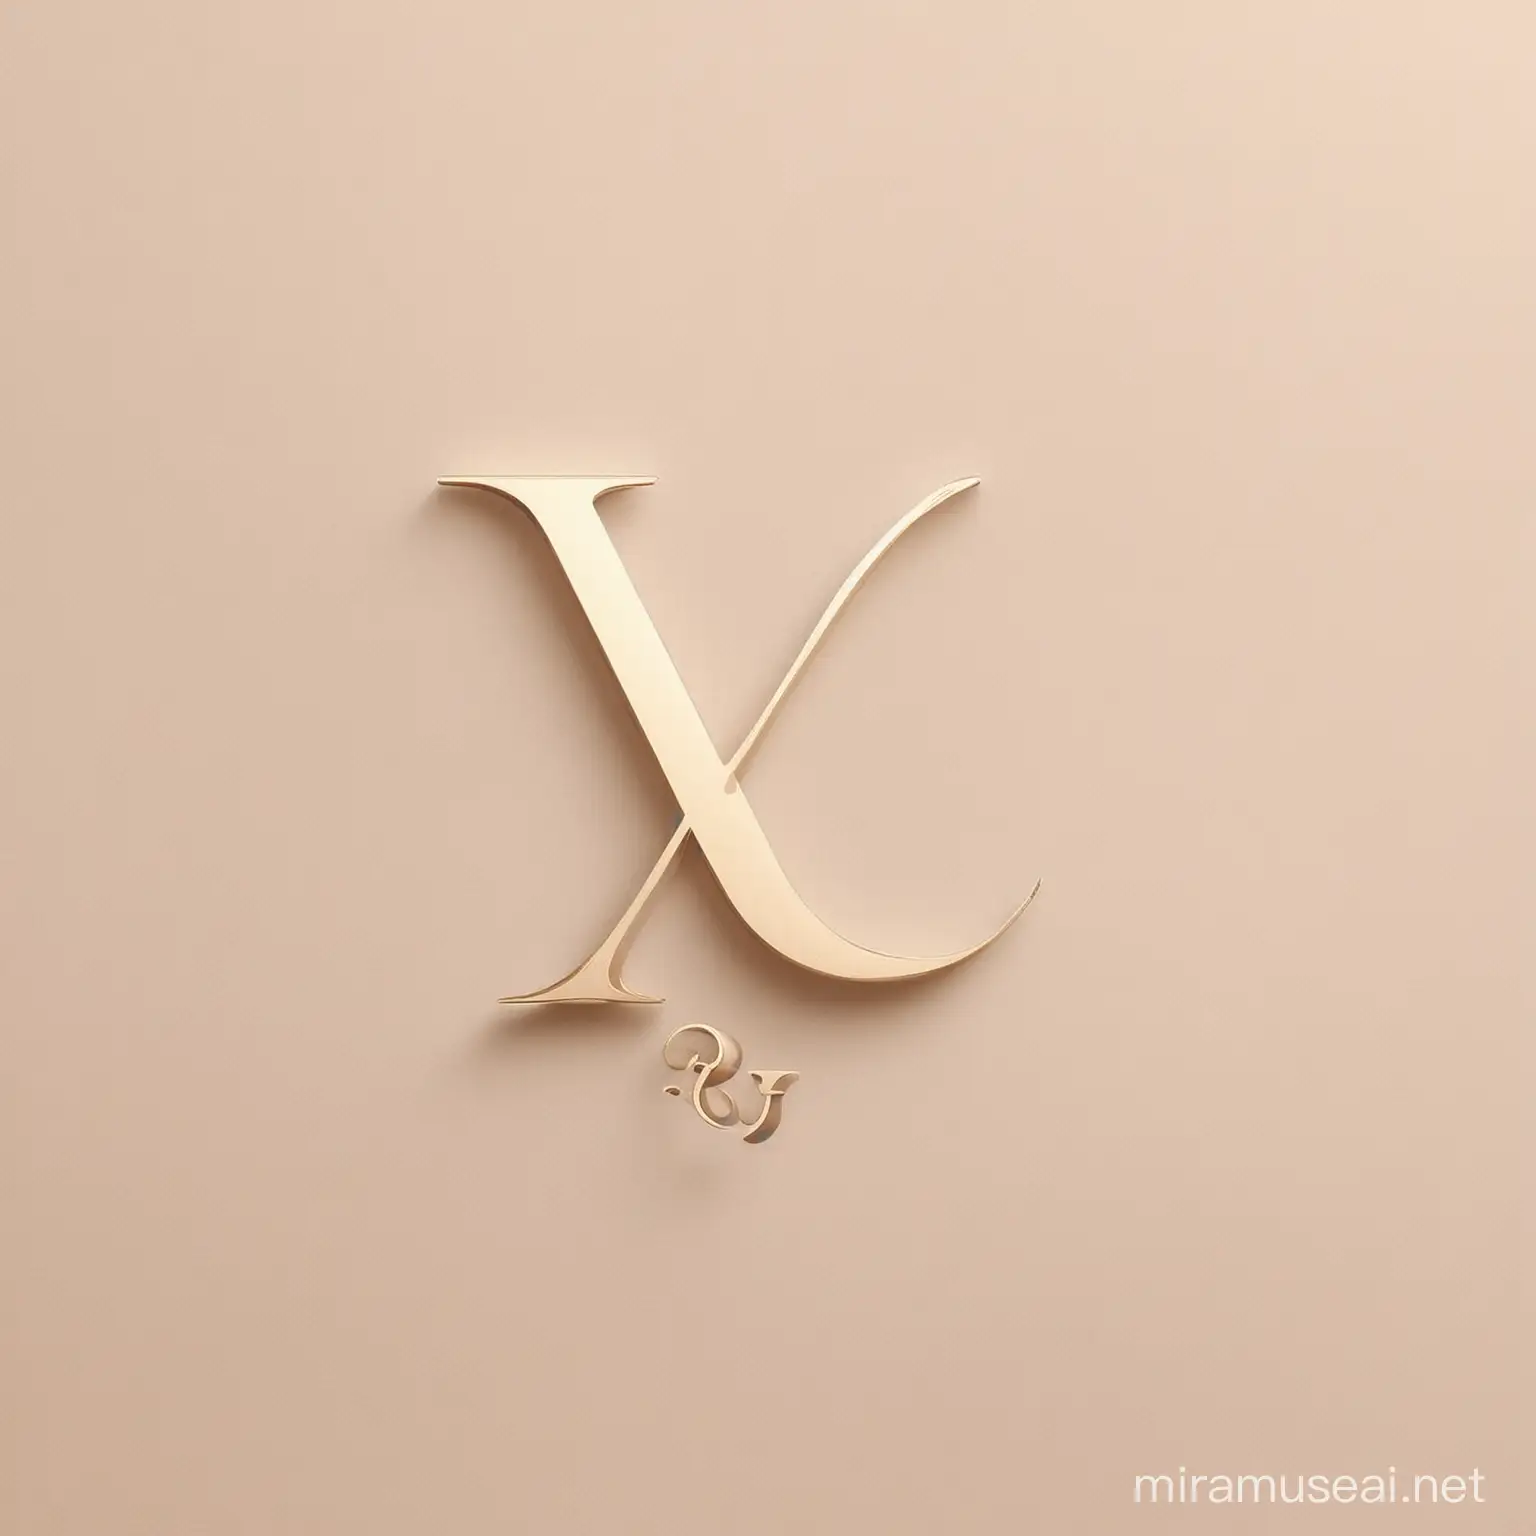 Simple Elegant Logo Design with Letters Y and R